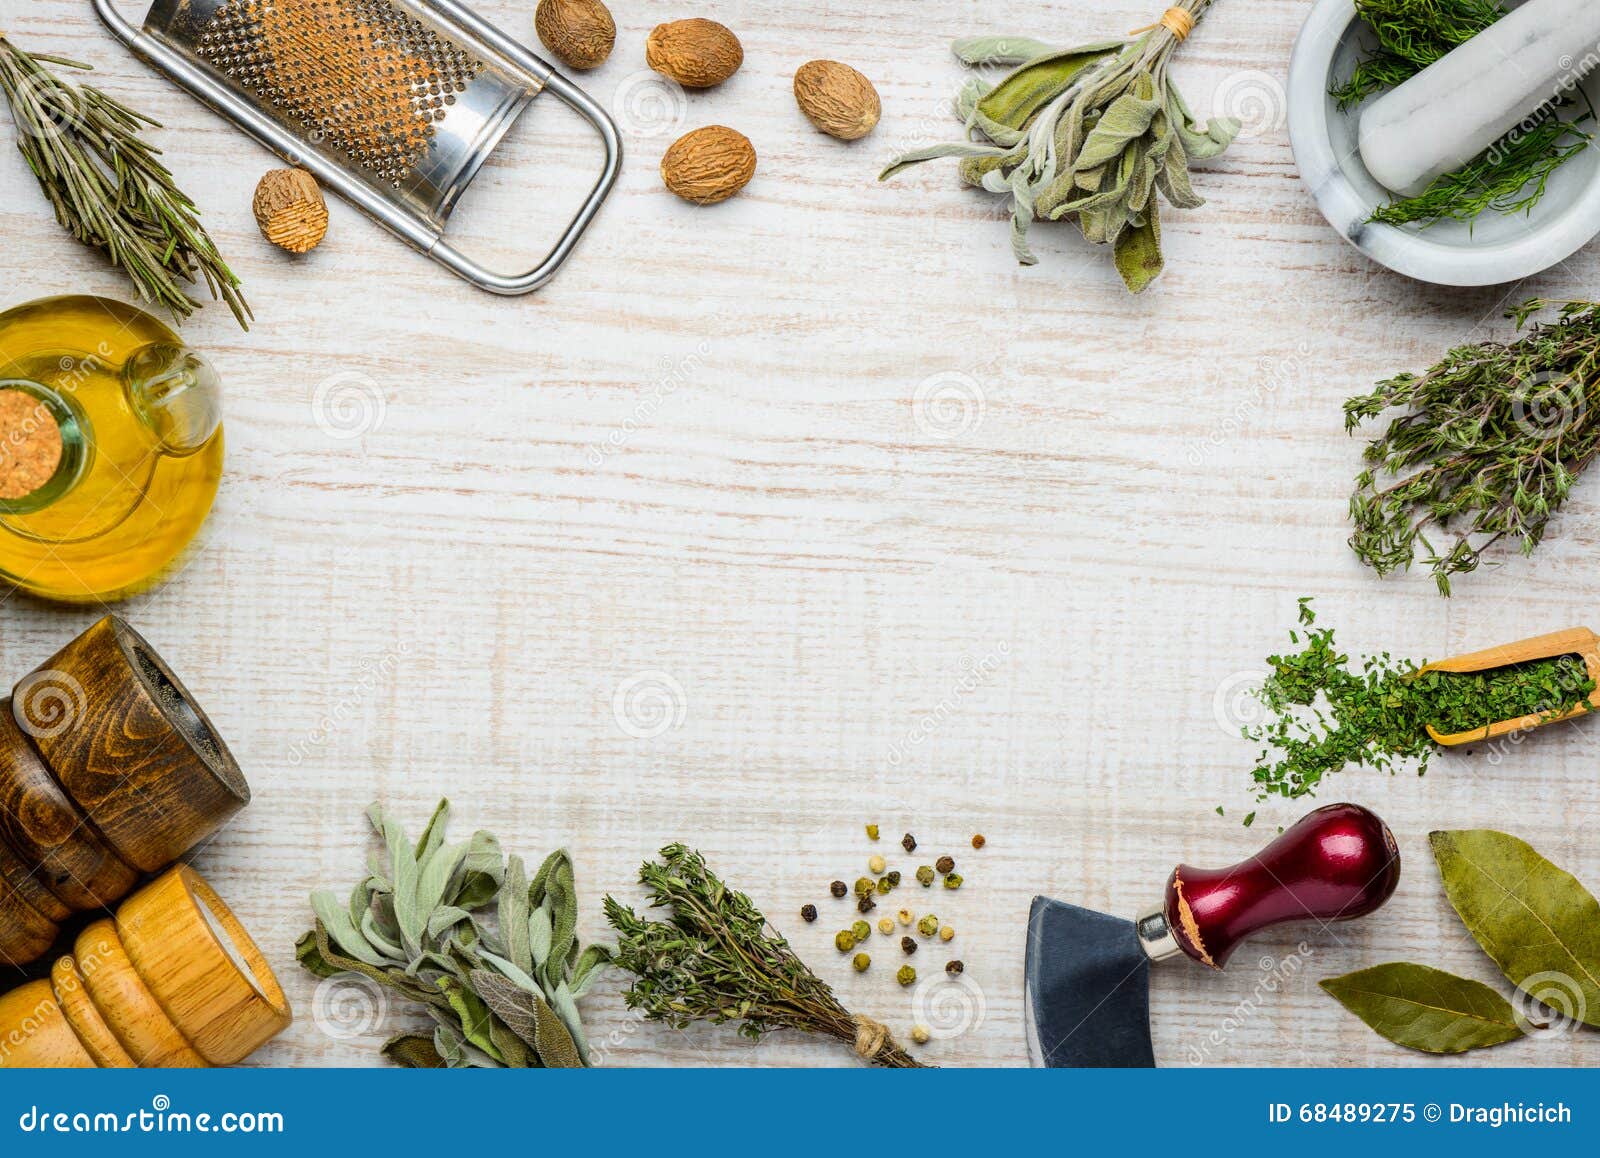 Cooking Ingredients and Herbs Frame Stock Image - Image of chopper ...